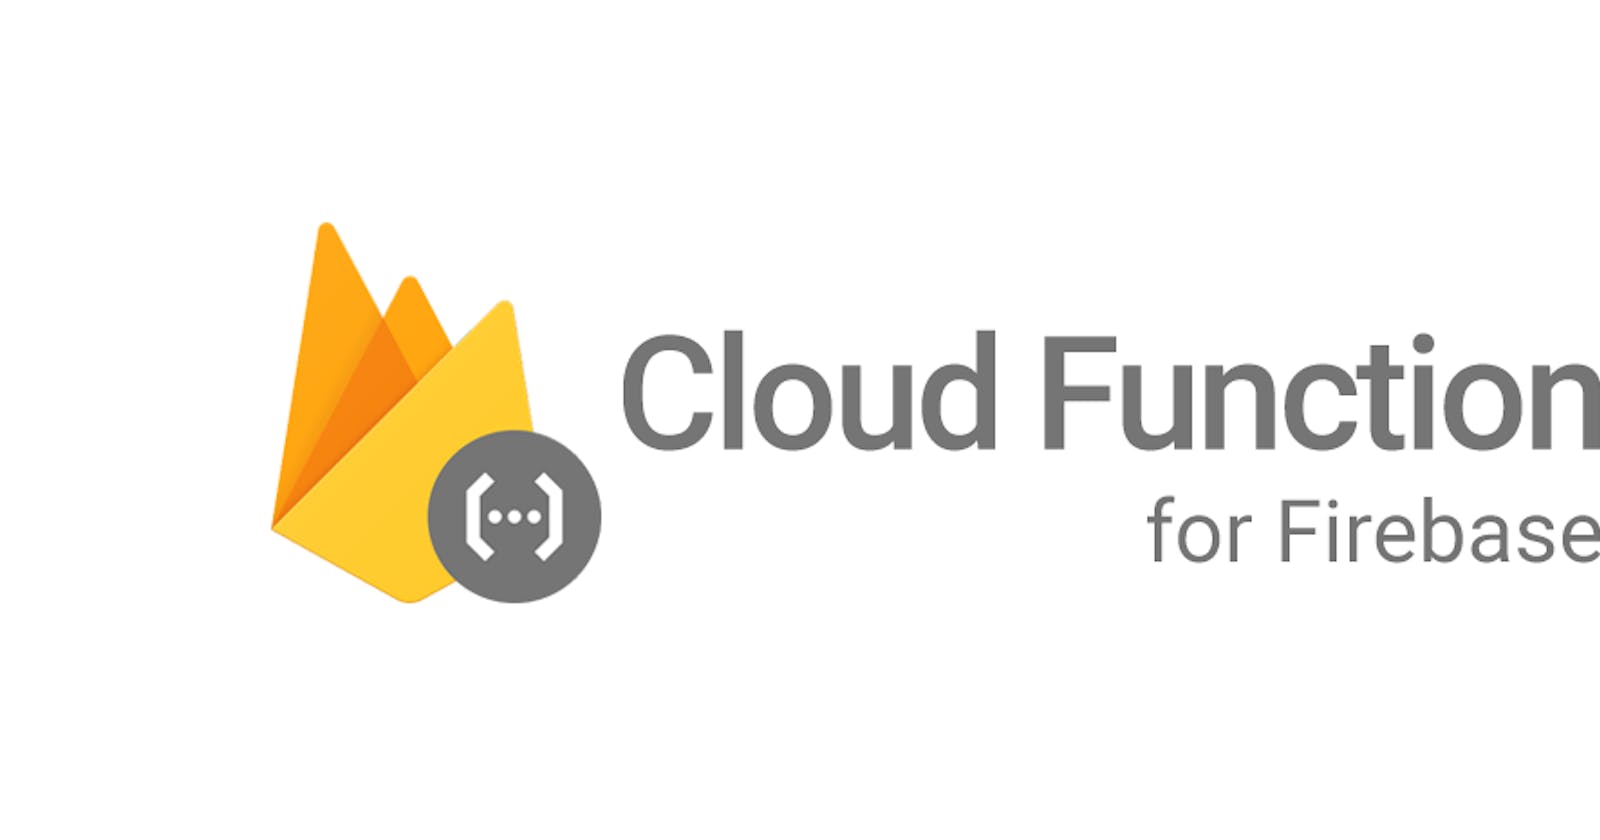 Deploy your first Firebase function